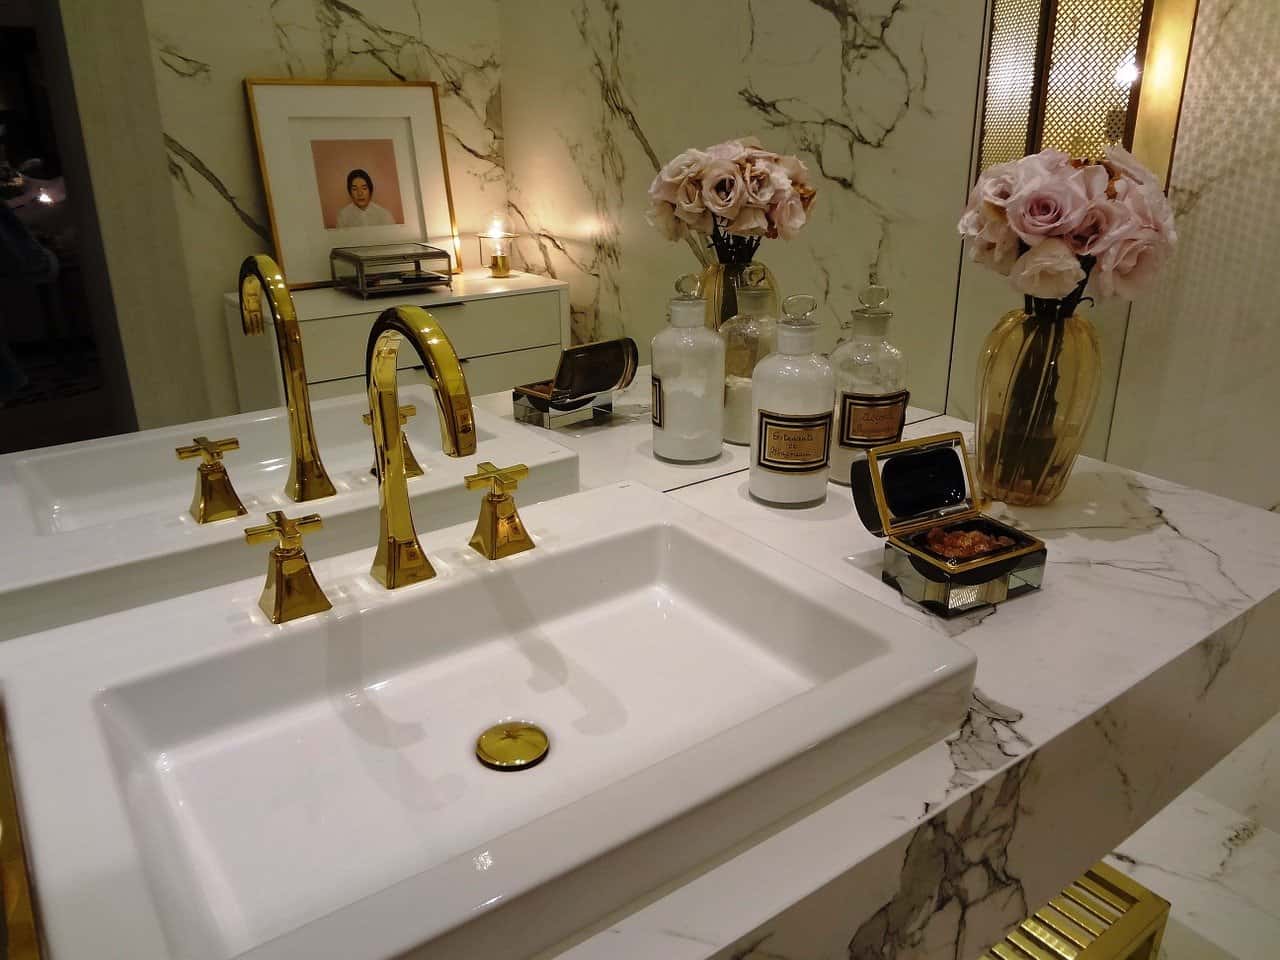 Choosing a bathroom sink – what to look for?